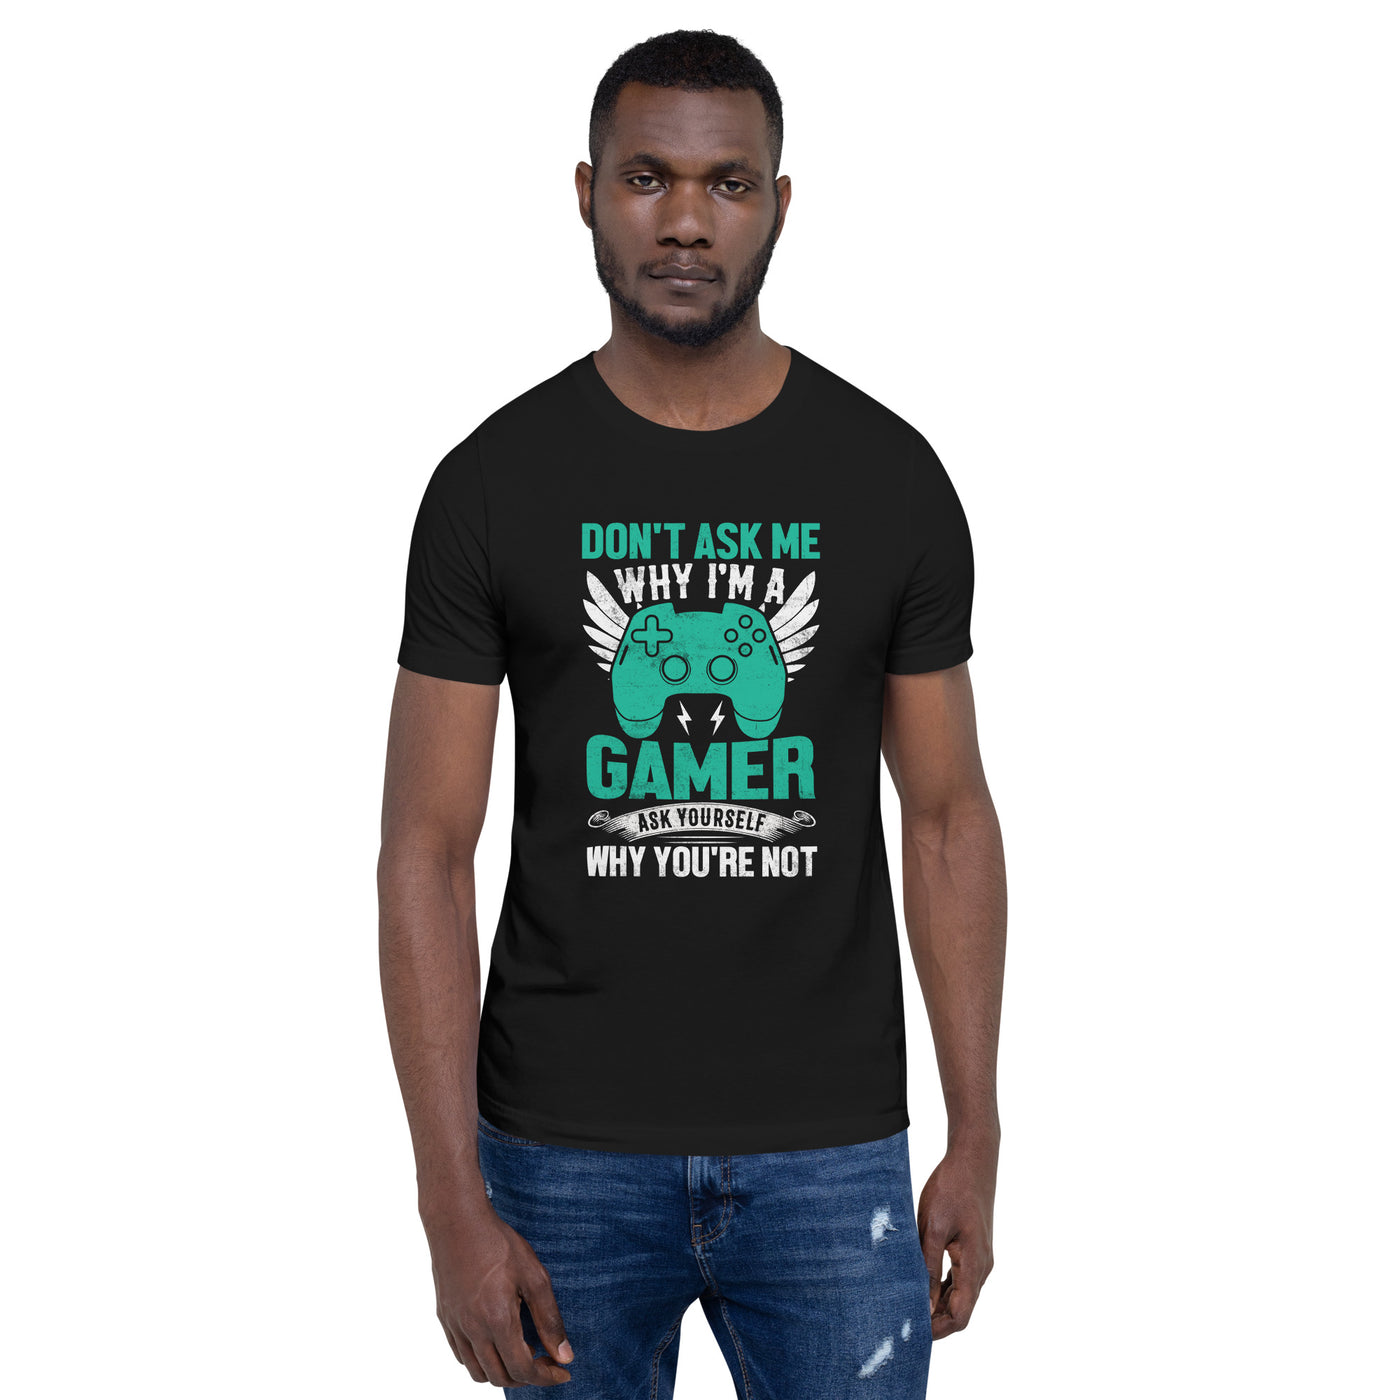 Don't Ask me why I am a Gamer - Unisex t-shirt